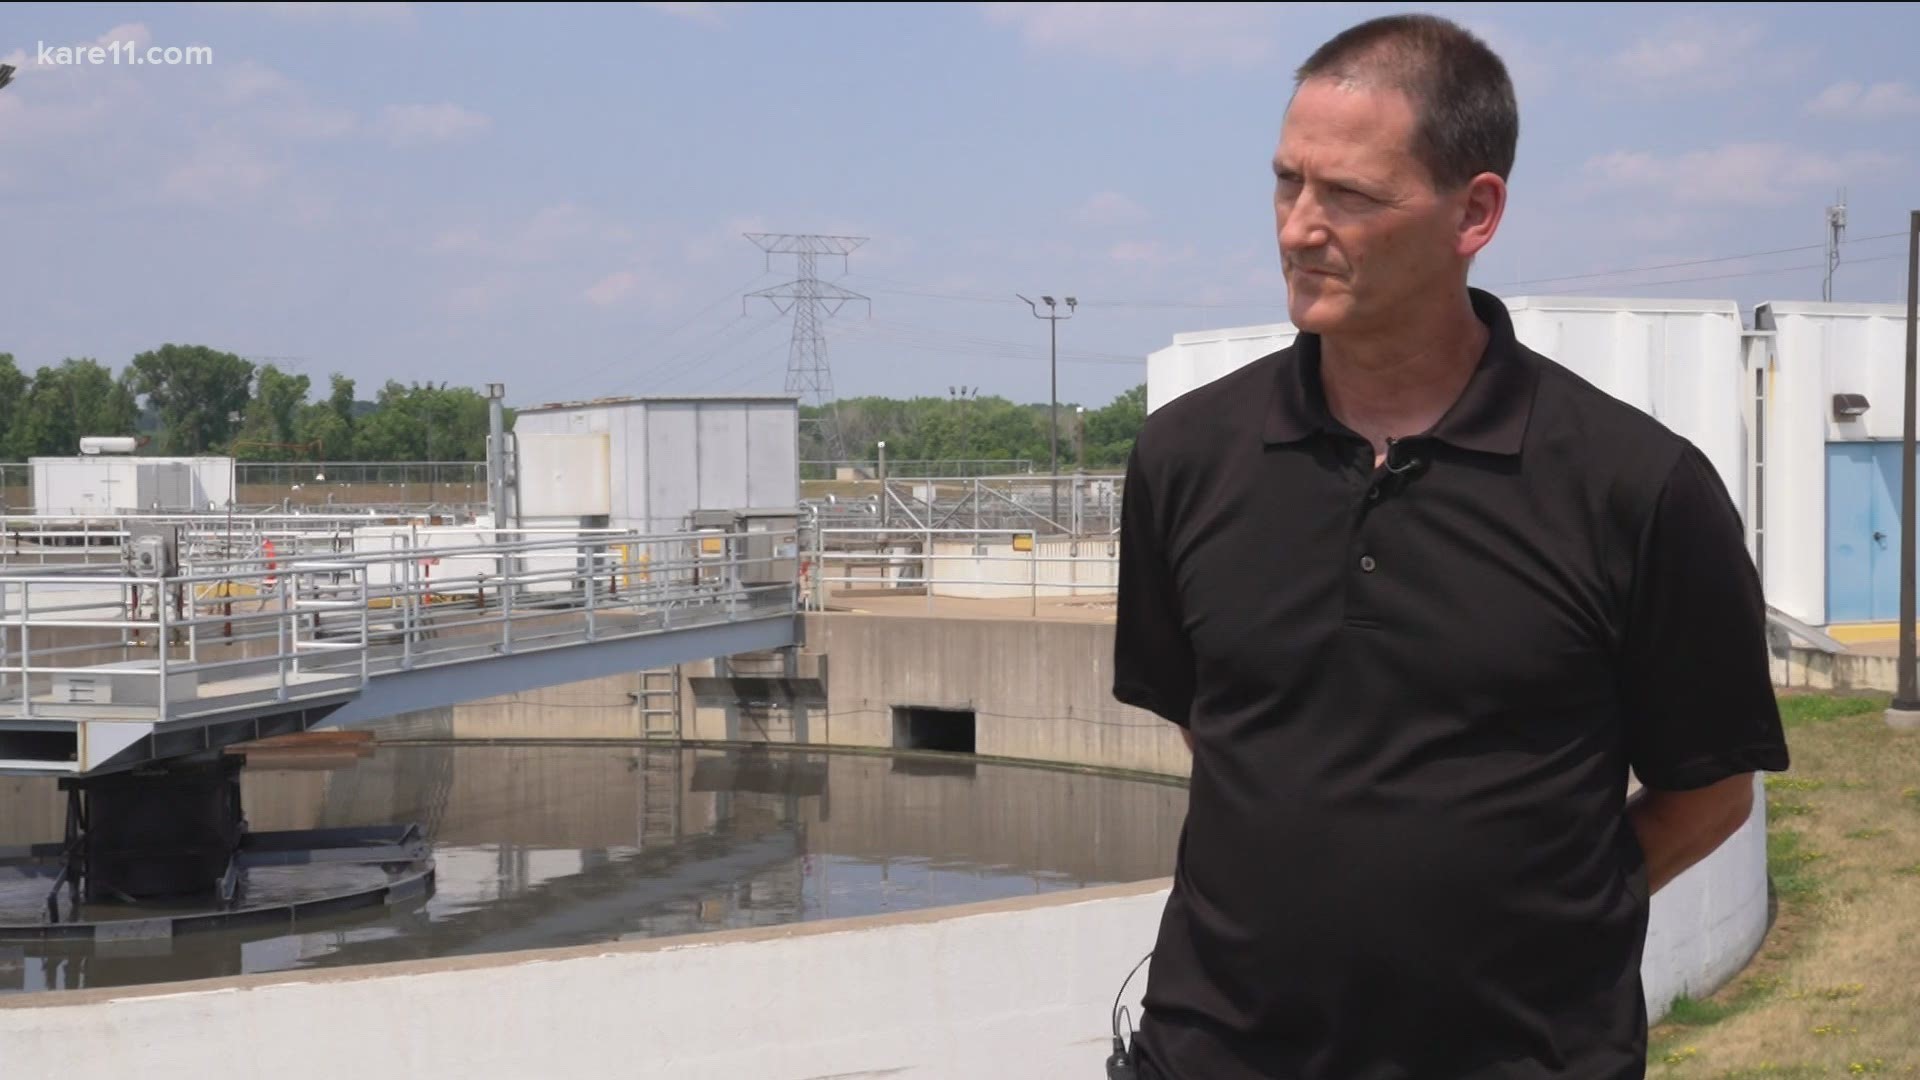 The Metropolitan Council Environmental Services operates nine wastewater treatment plants across the seven-county metro area.